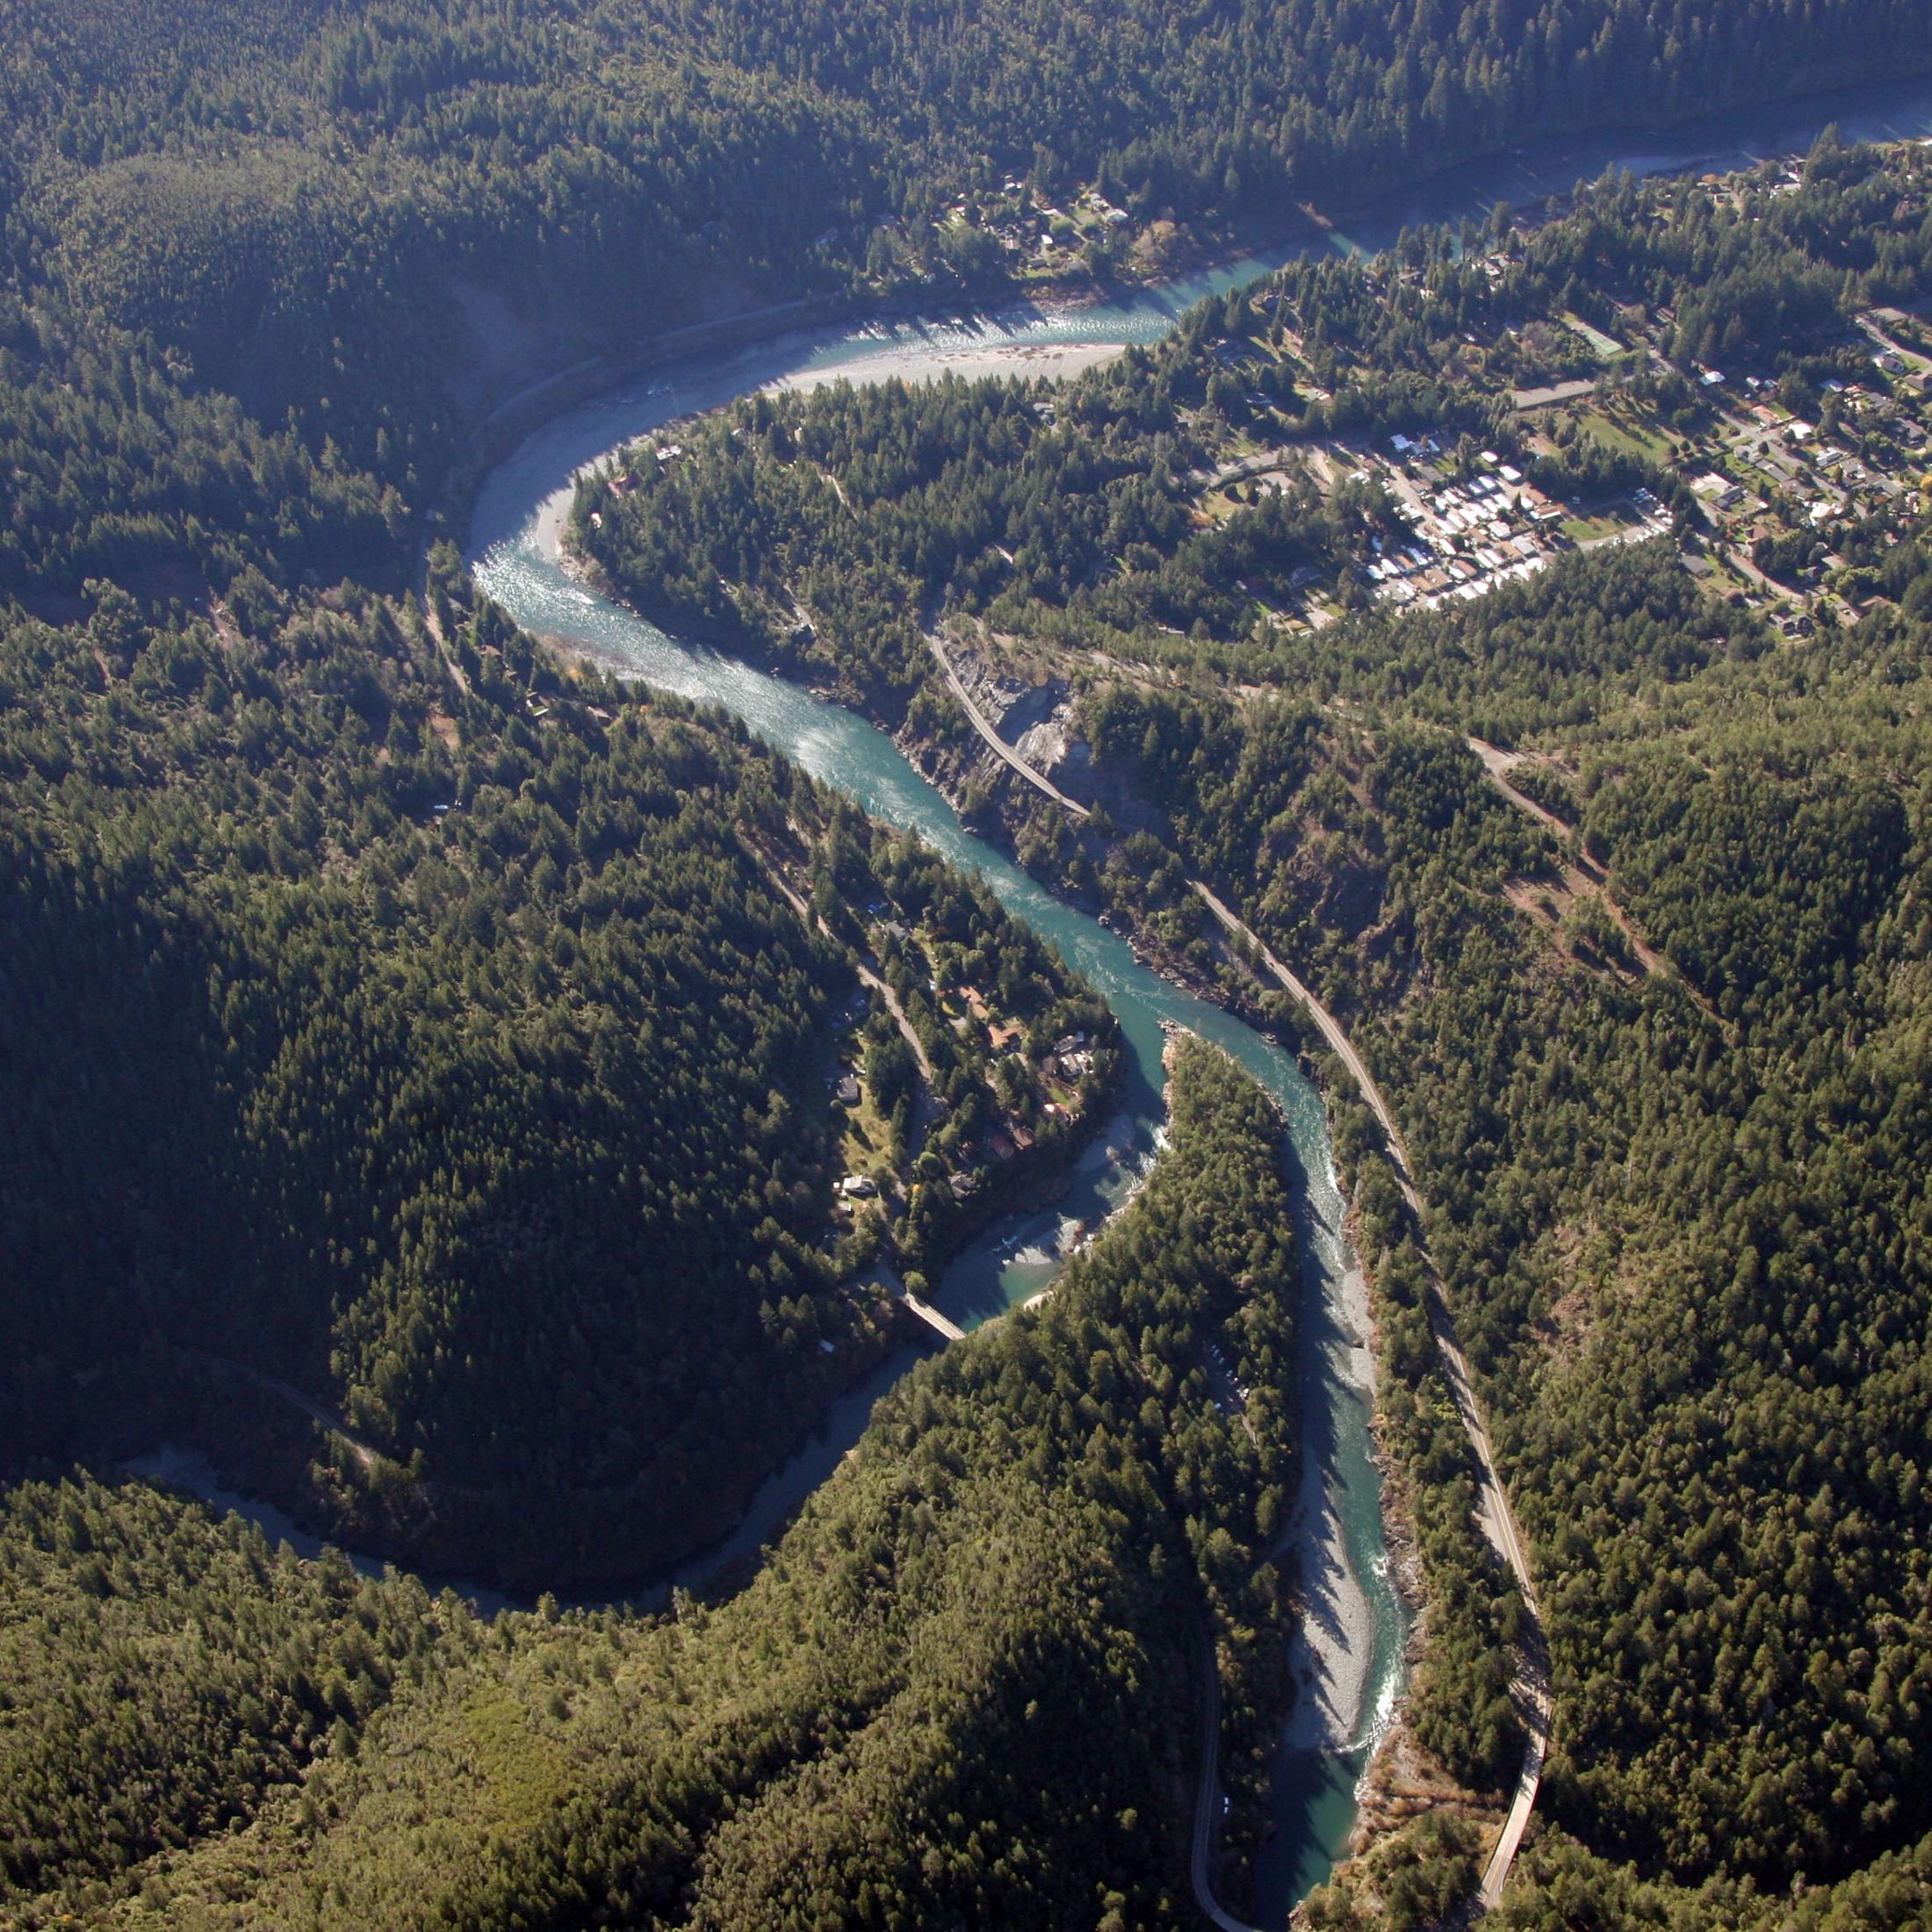 Aerial view of a river meandering through forested mountains with a small town alongside the river.